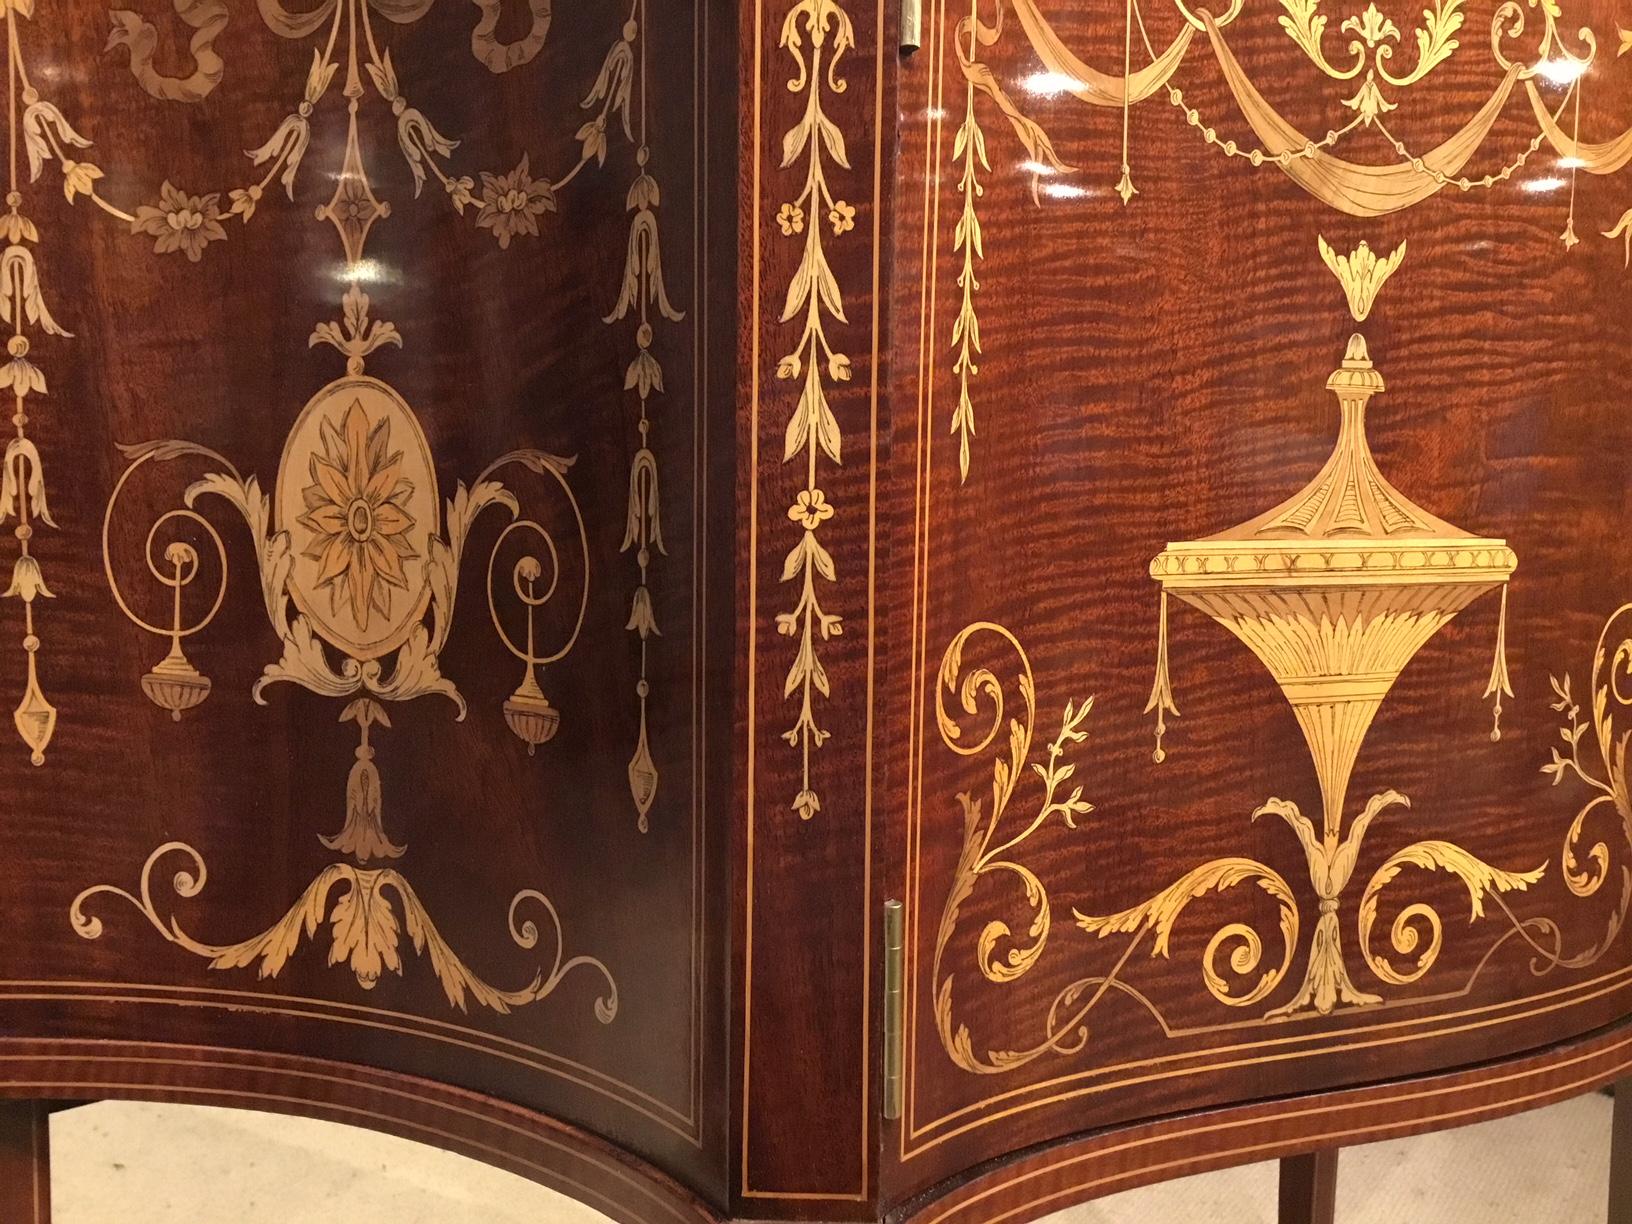  Marquetry Inlaid Edwardian Period Serpentine Cabinet by Maple 1